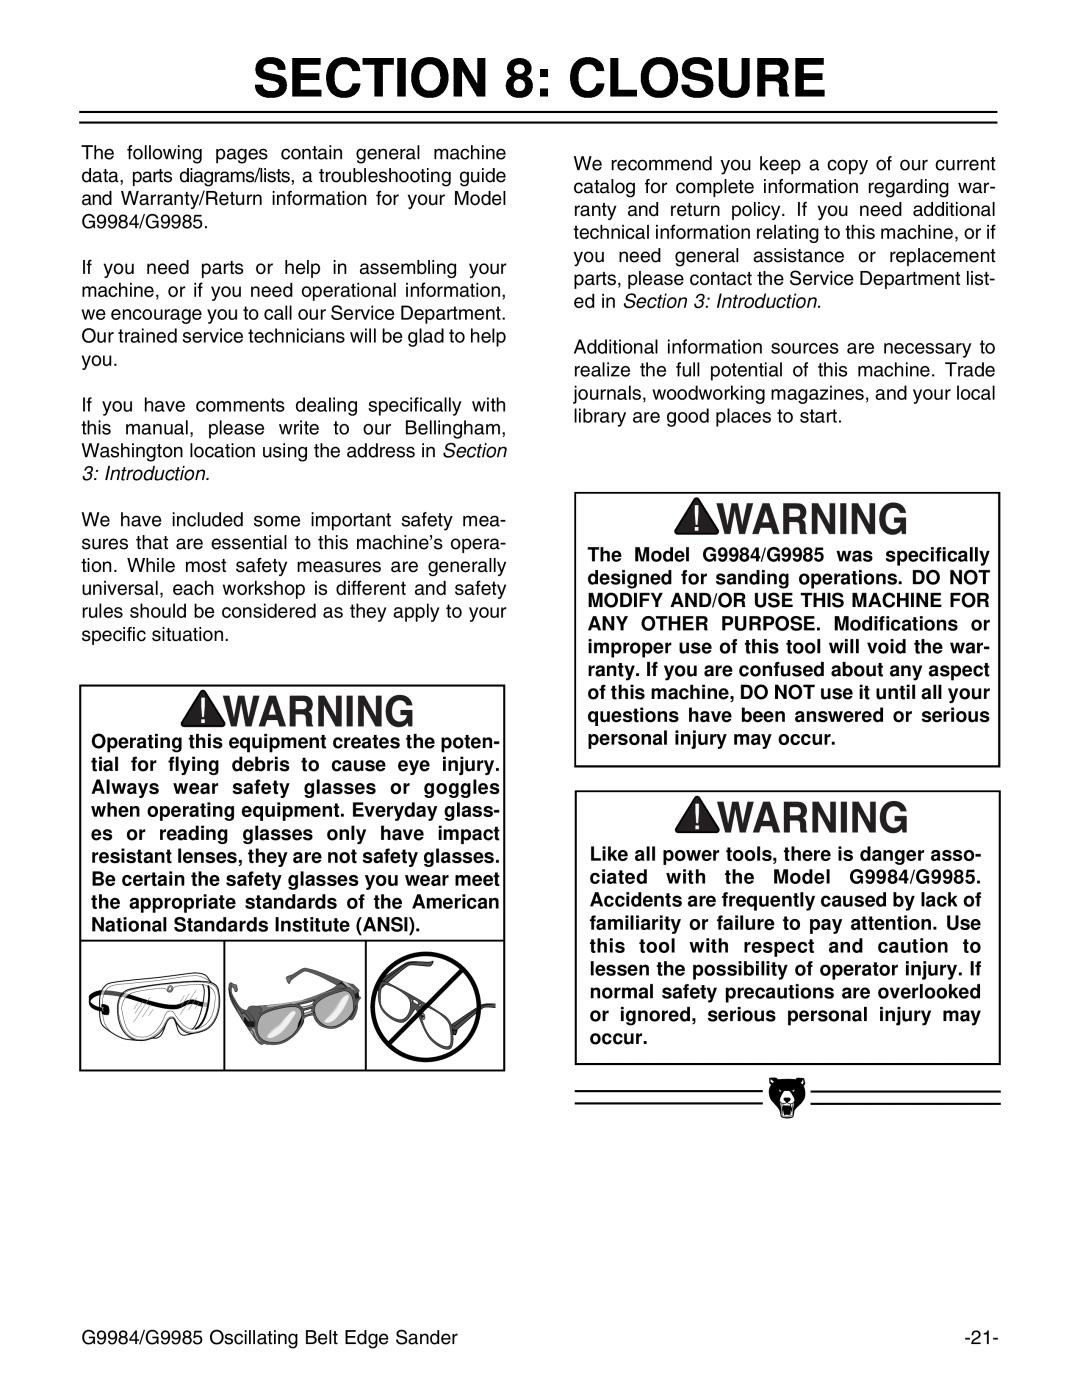 Grizzly G9985, G9984 instruction manual Closure 